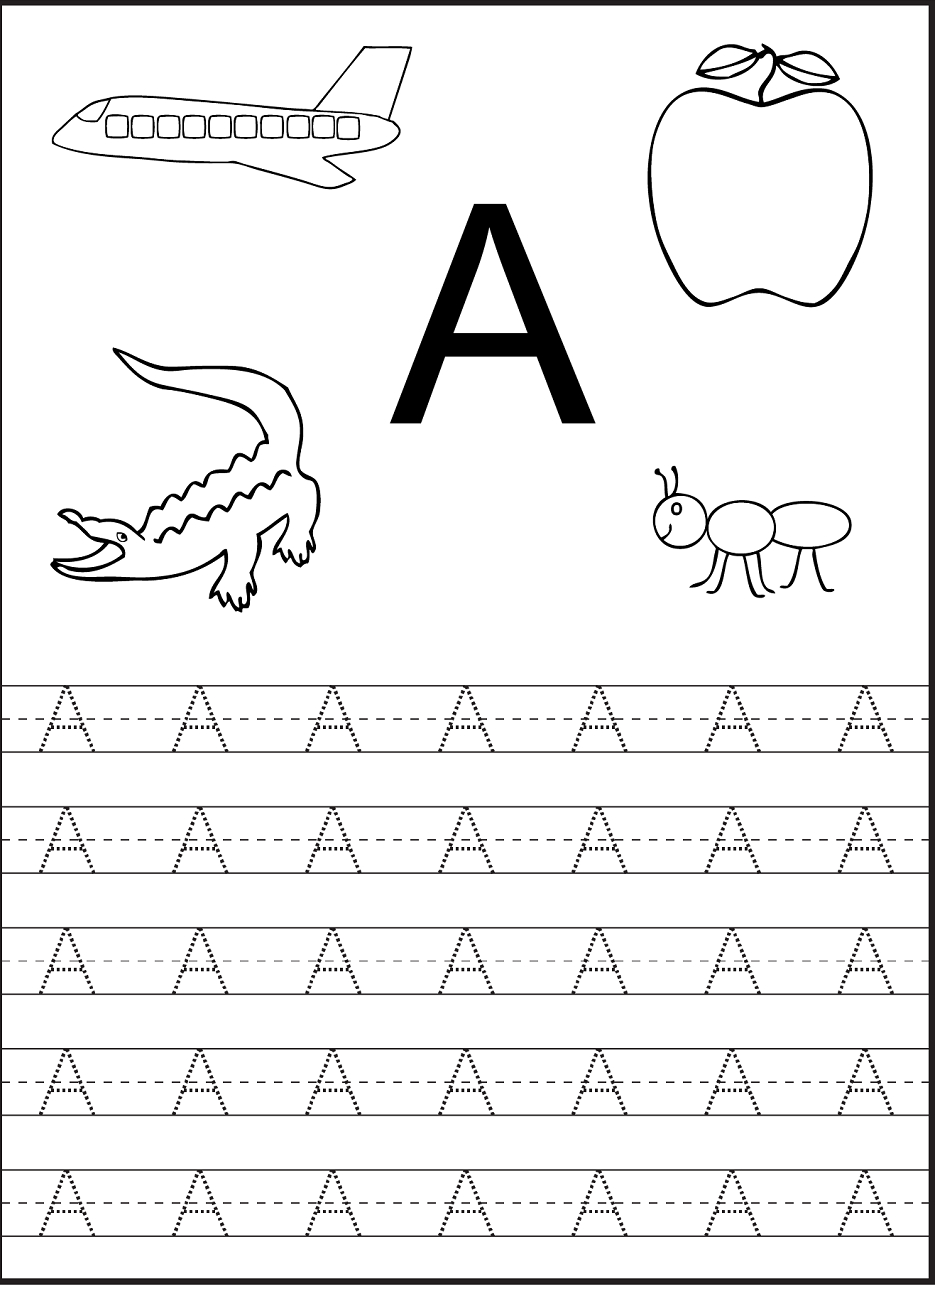 Tracing The Letter A Free Printable | Preschool Worksheets regarding Tracing Letters For Preschool Printables